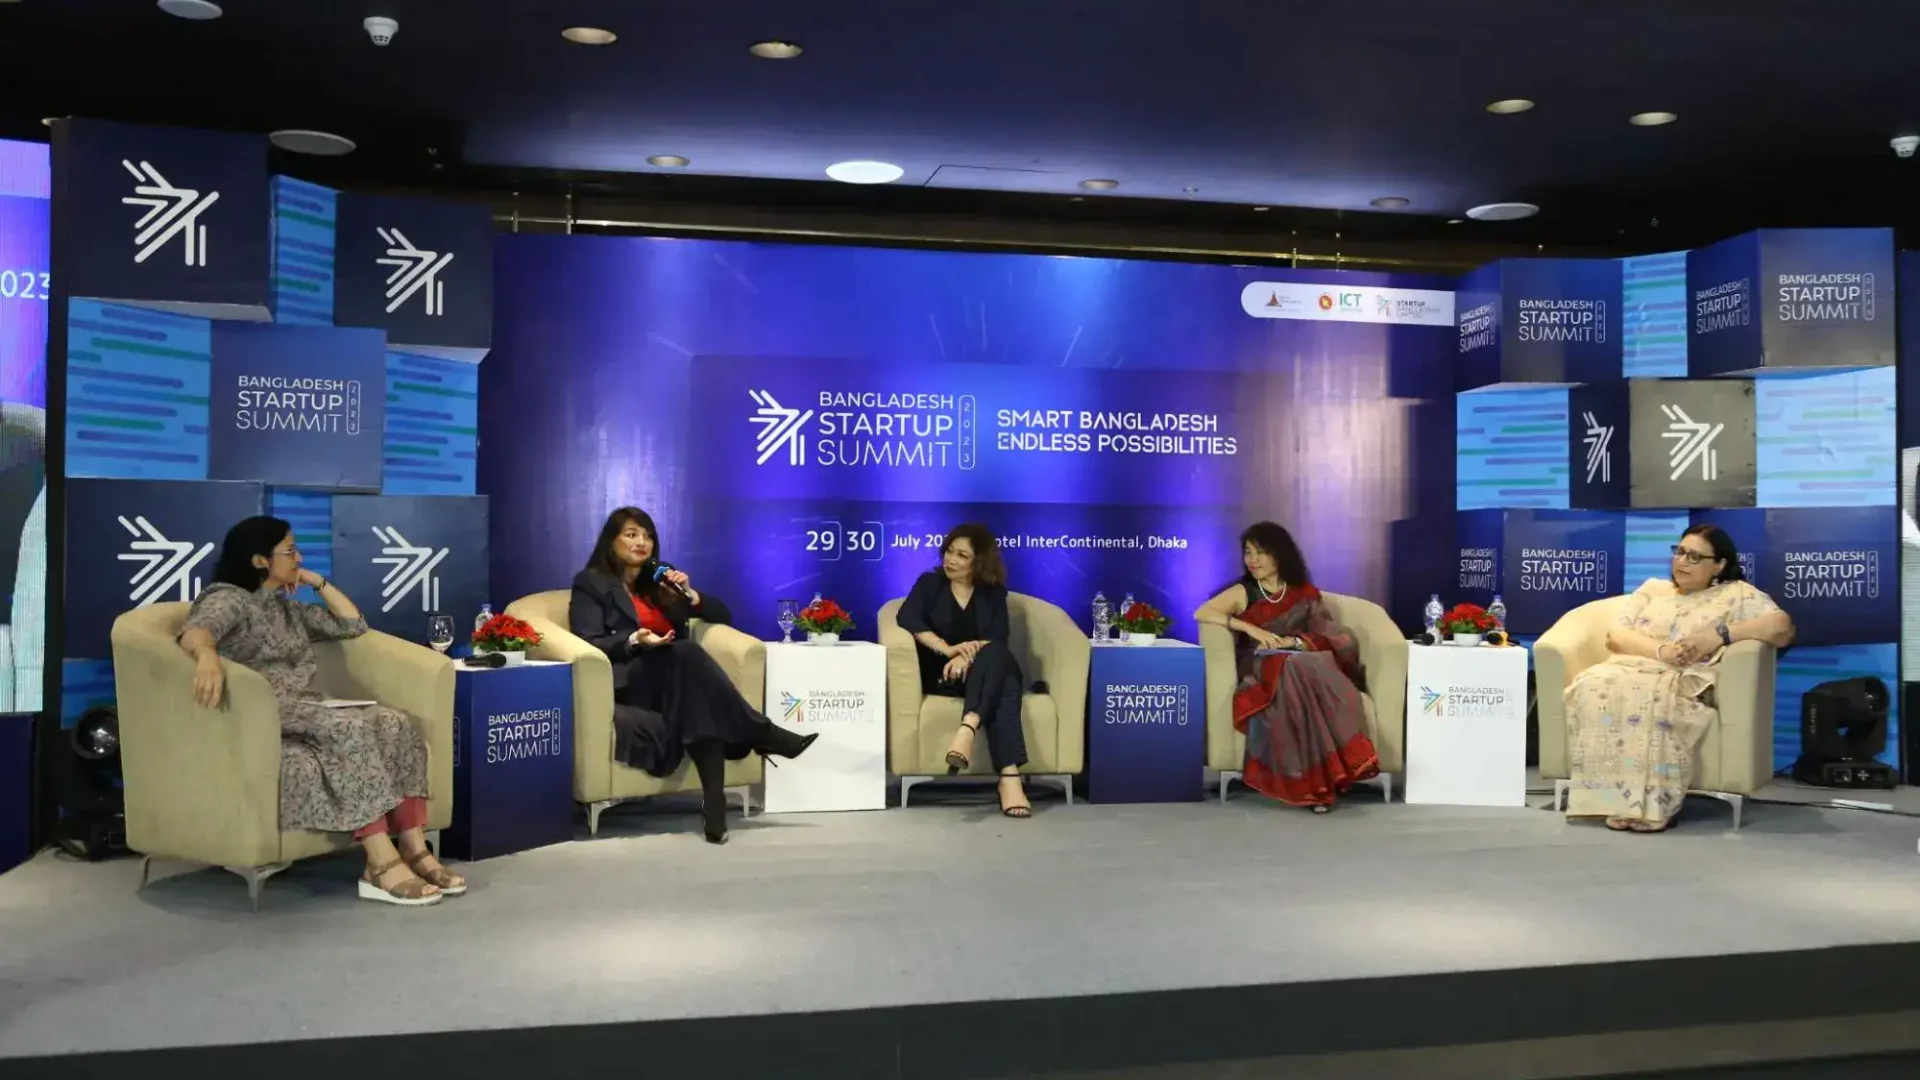 Rosina Mazumder, Founder & CEO of Arogga, speaking about her experience on the Gender Lens Investing Panel Discussion.